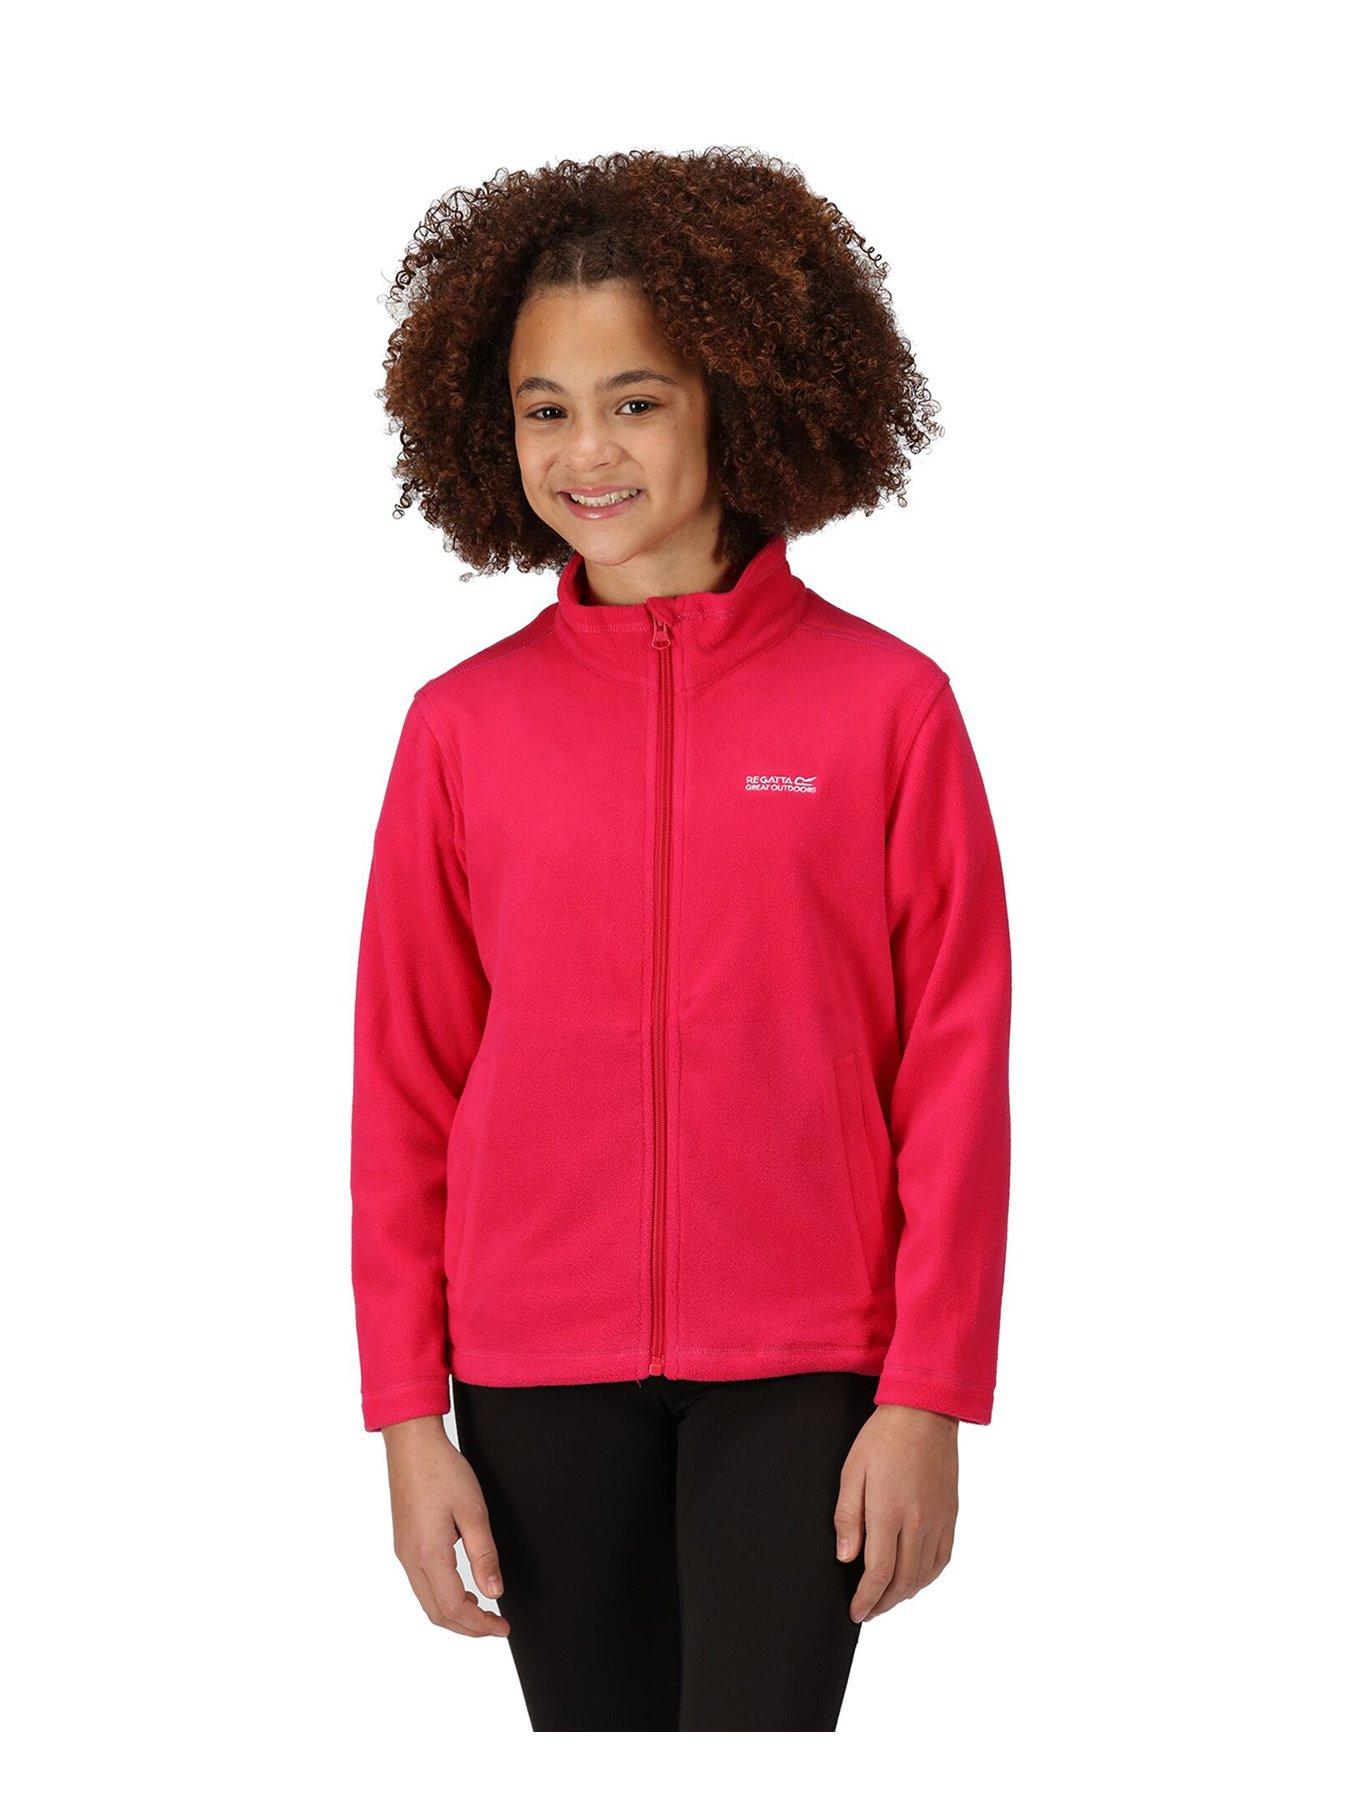 11/12 years sports leisure | & & Sports & Kids jackets | clothing | baby Coats